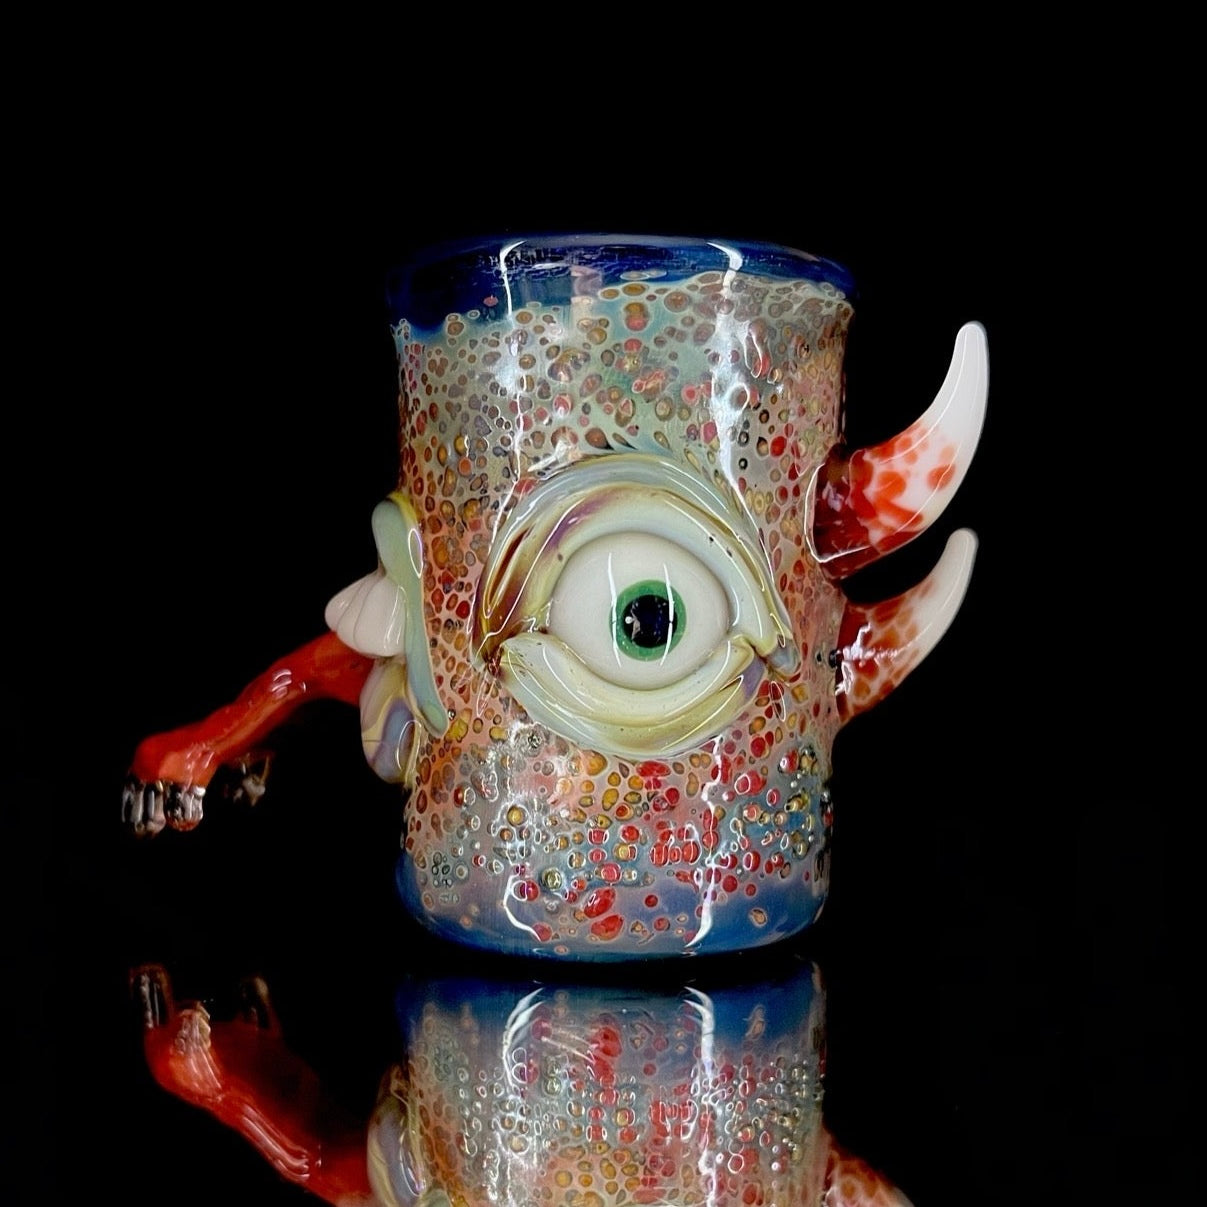 Cyclops shot glass by Leviathan Glass